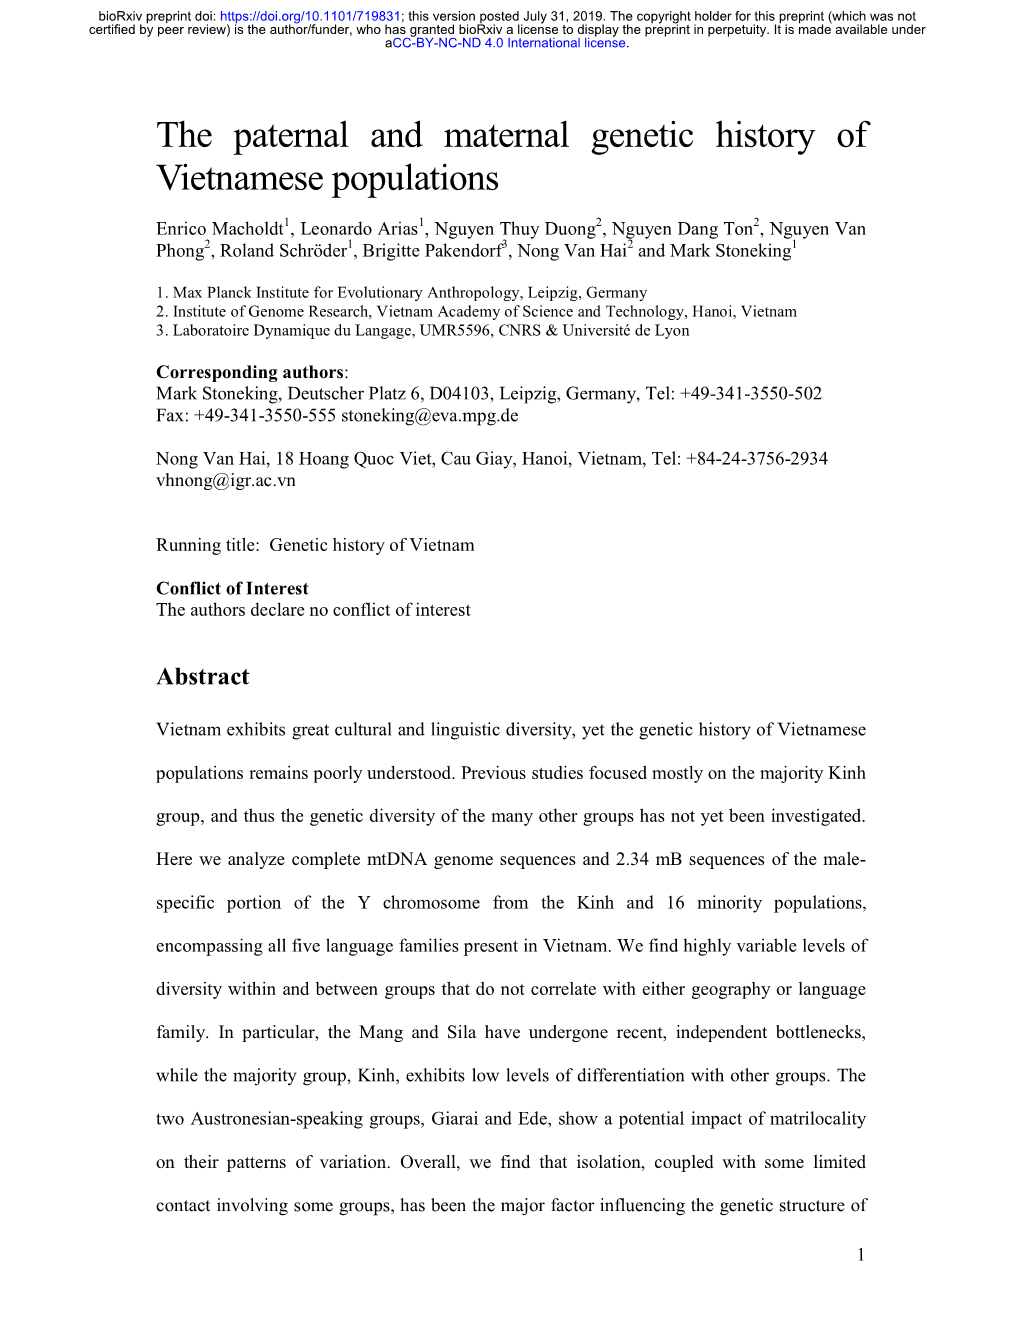 The Paternal and Maternal Genetic History of Vietnamese Populations